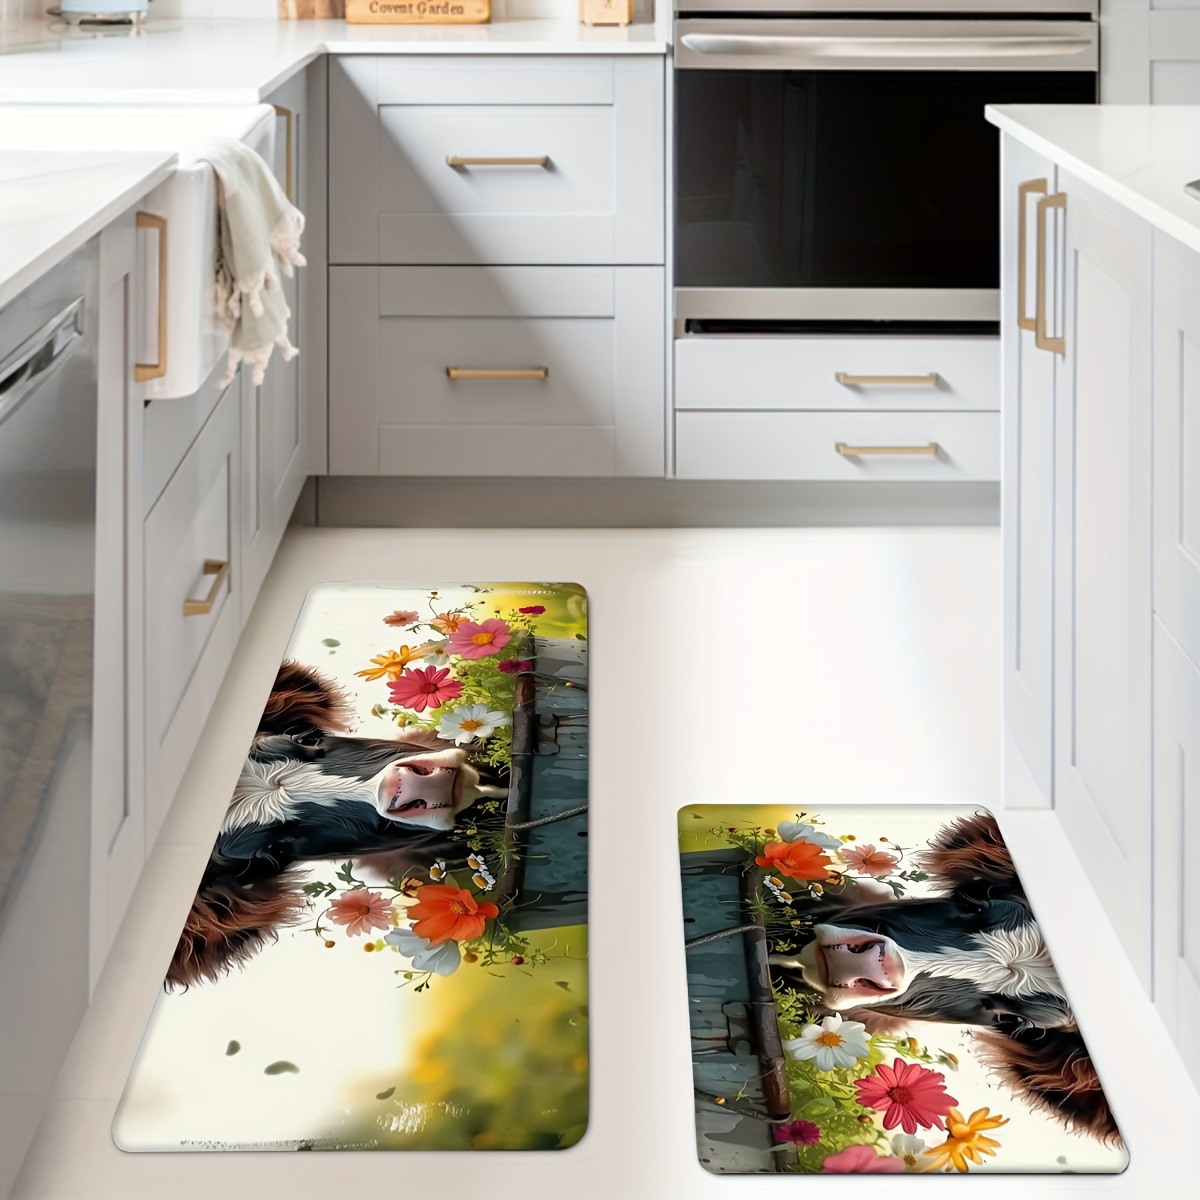 

1/2pcs, Cow Kitchen Mats, Non-slip And Durable Bathroom Pads For Floor, Comfortable Standing Runner Rugs, Carpets For Kitchen, Home, Office, Laundry Room, Bathroom, Spring Decor